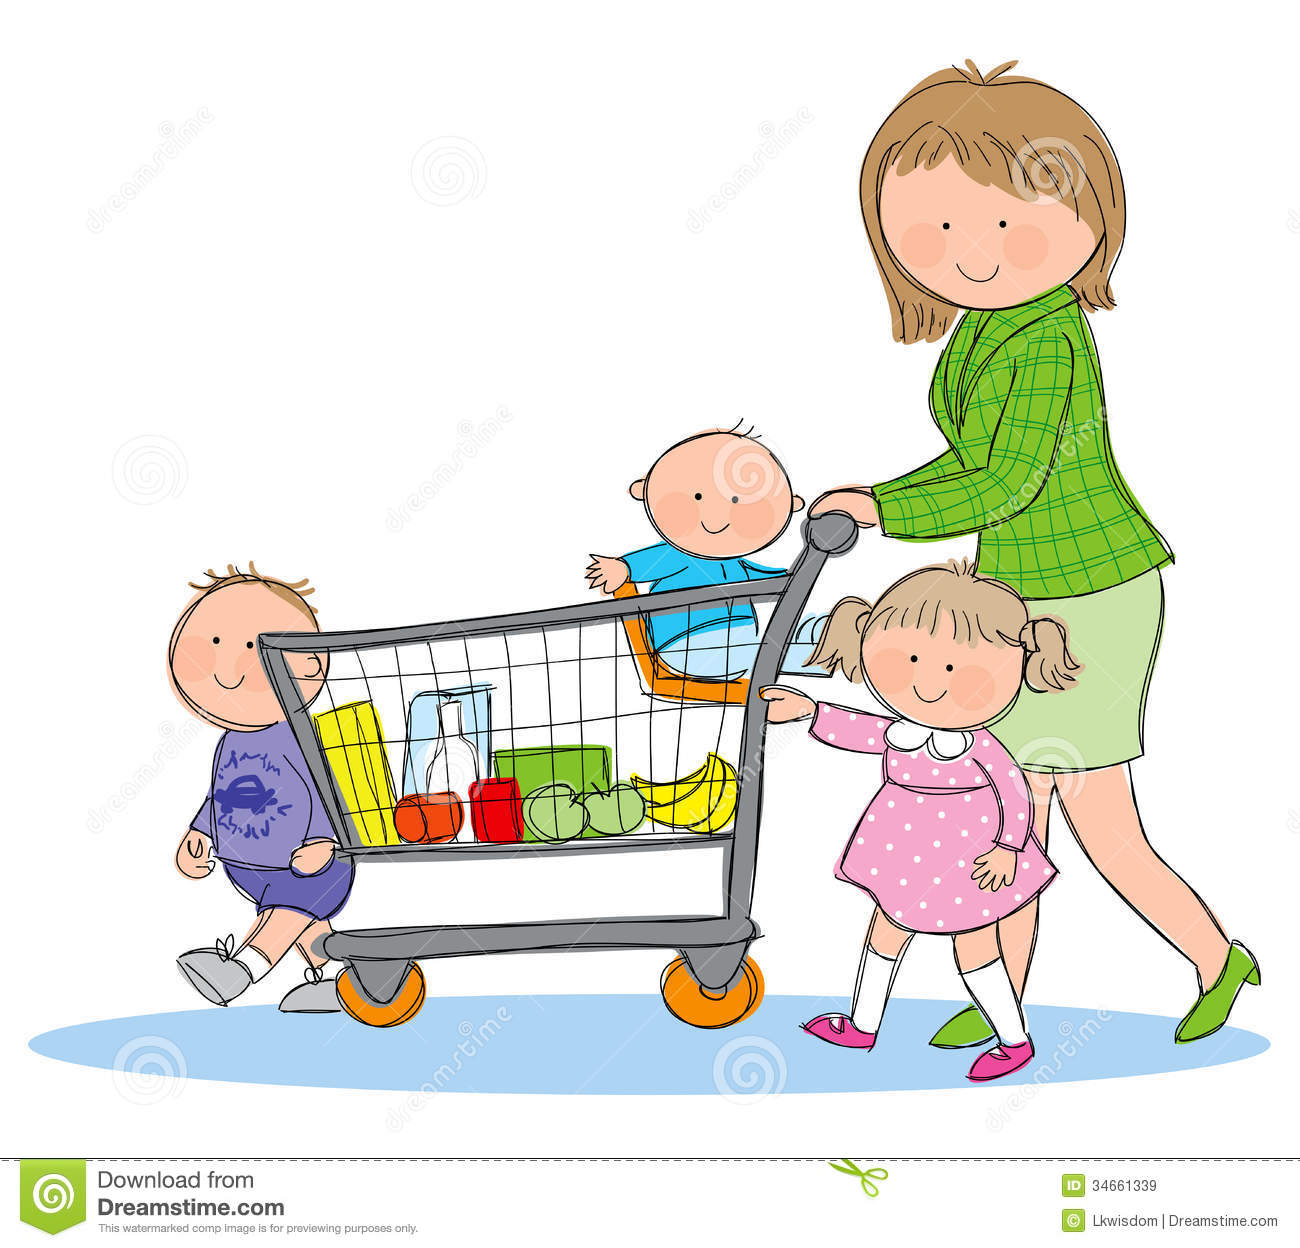 Hand Drawn Picture Of Family Shopping For Groceries  Illustrated In A